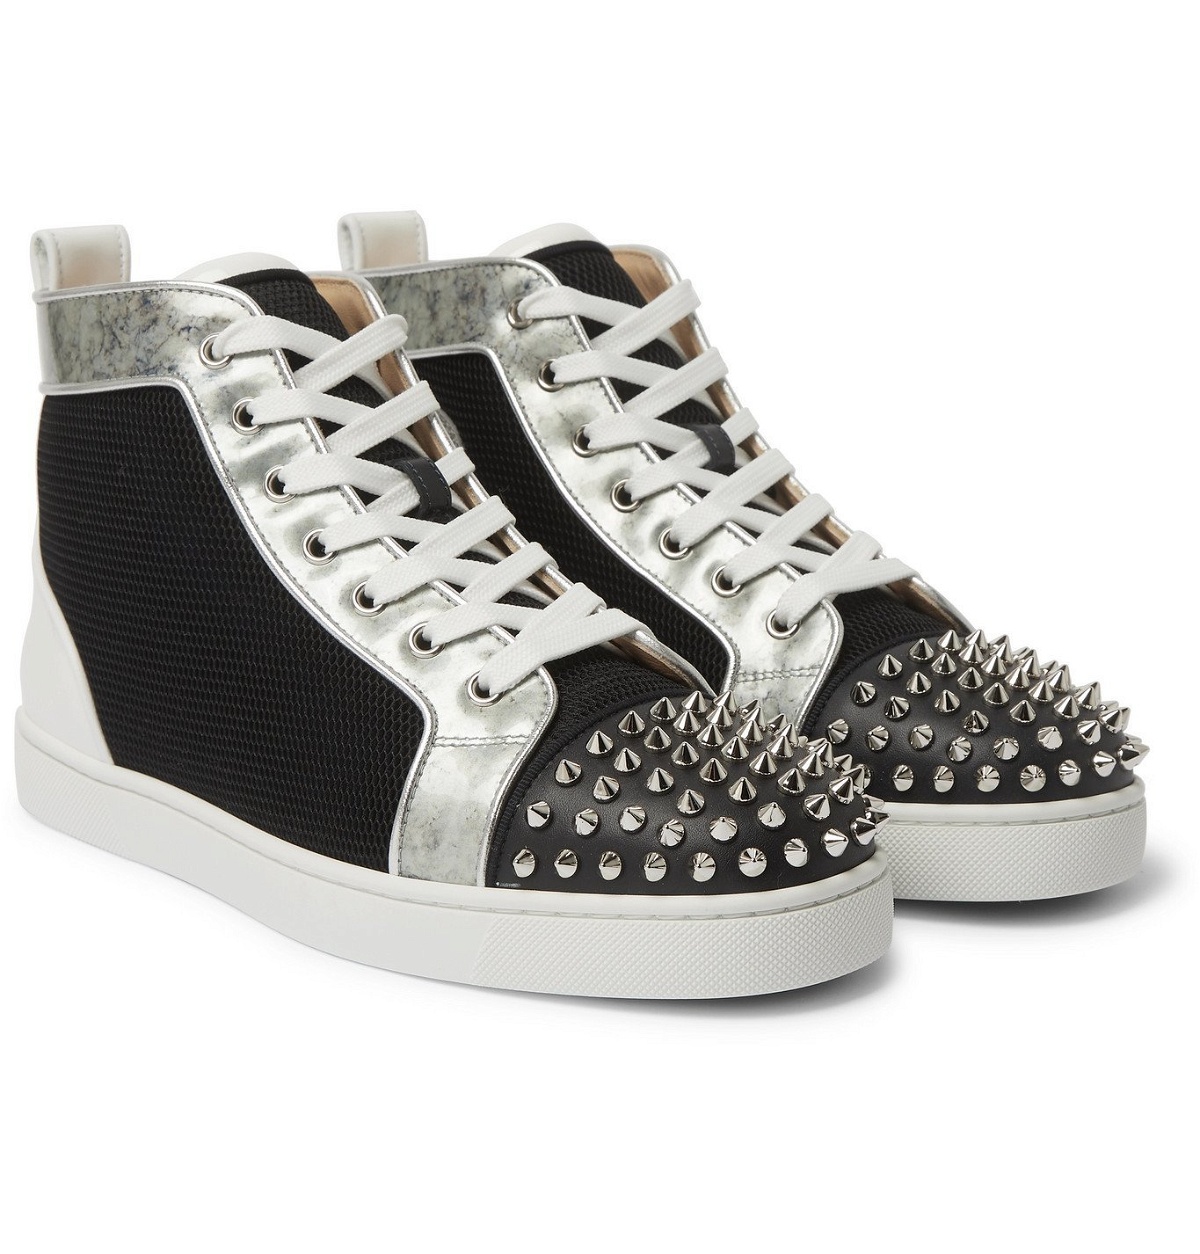 CHRISTIAN - Louis Spiked Leather Mesh High-Top Sneakers - Black Christian Louboutin